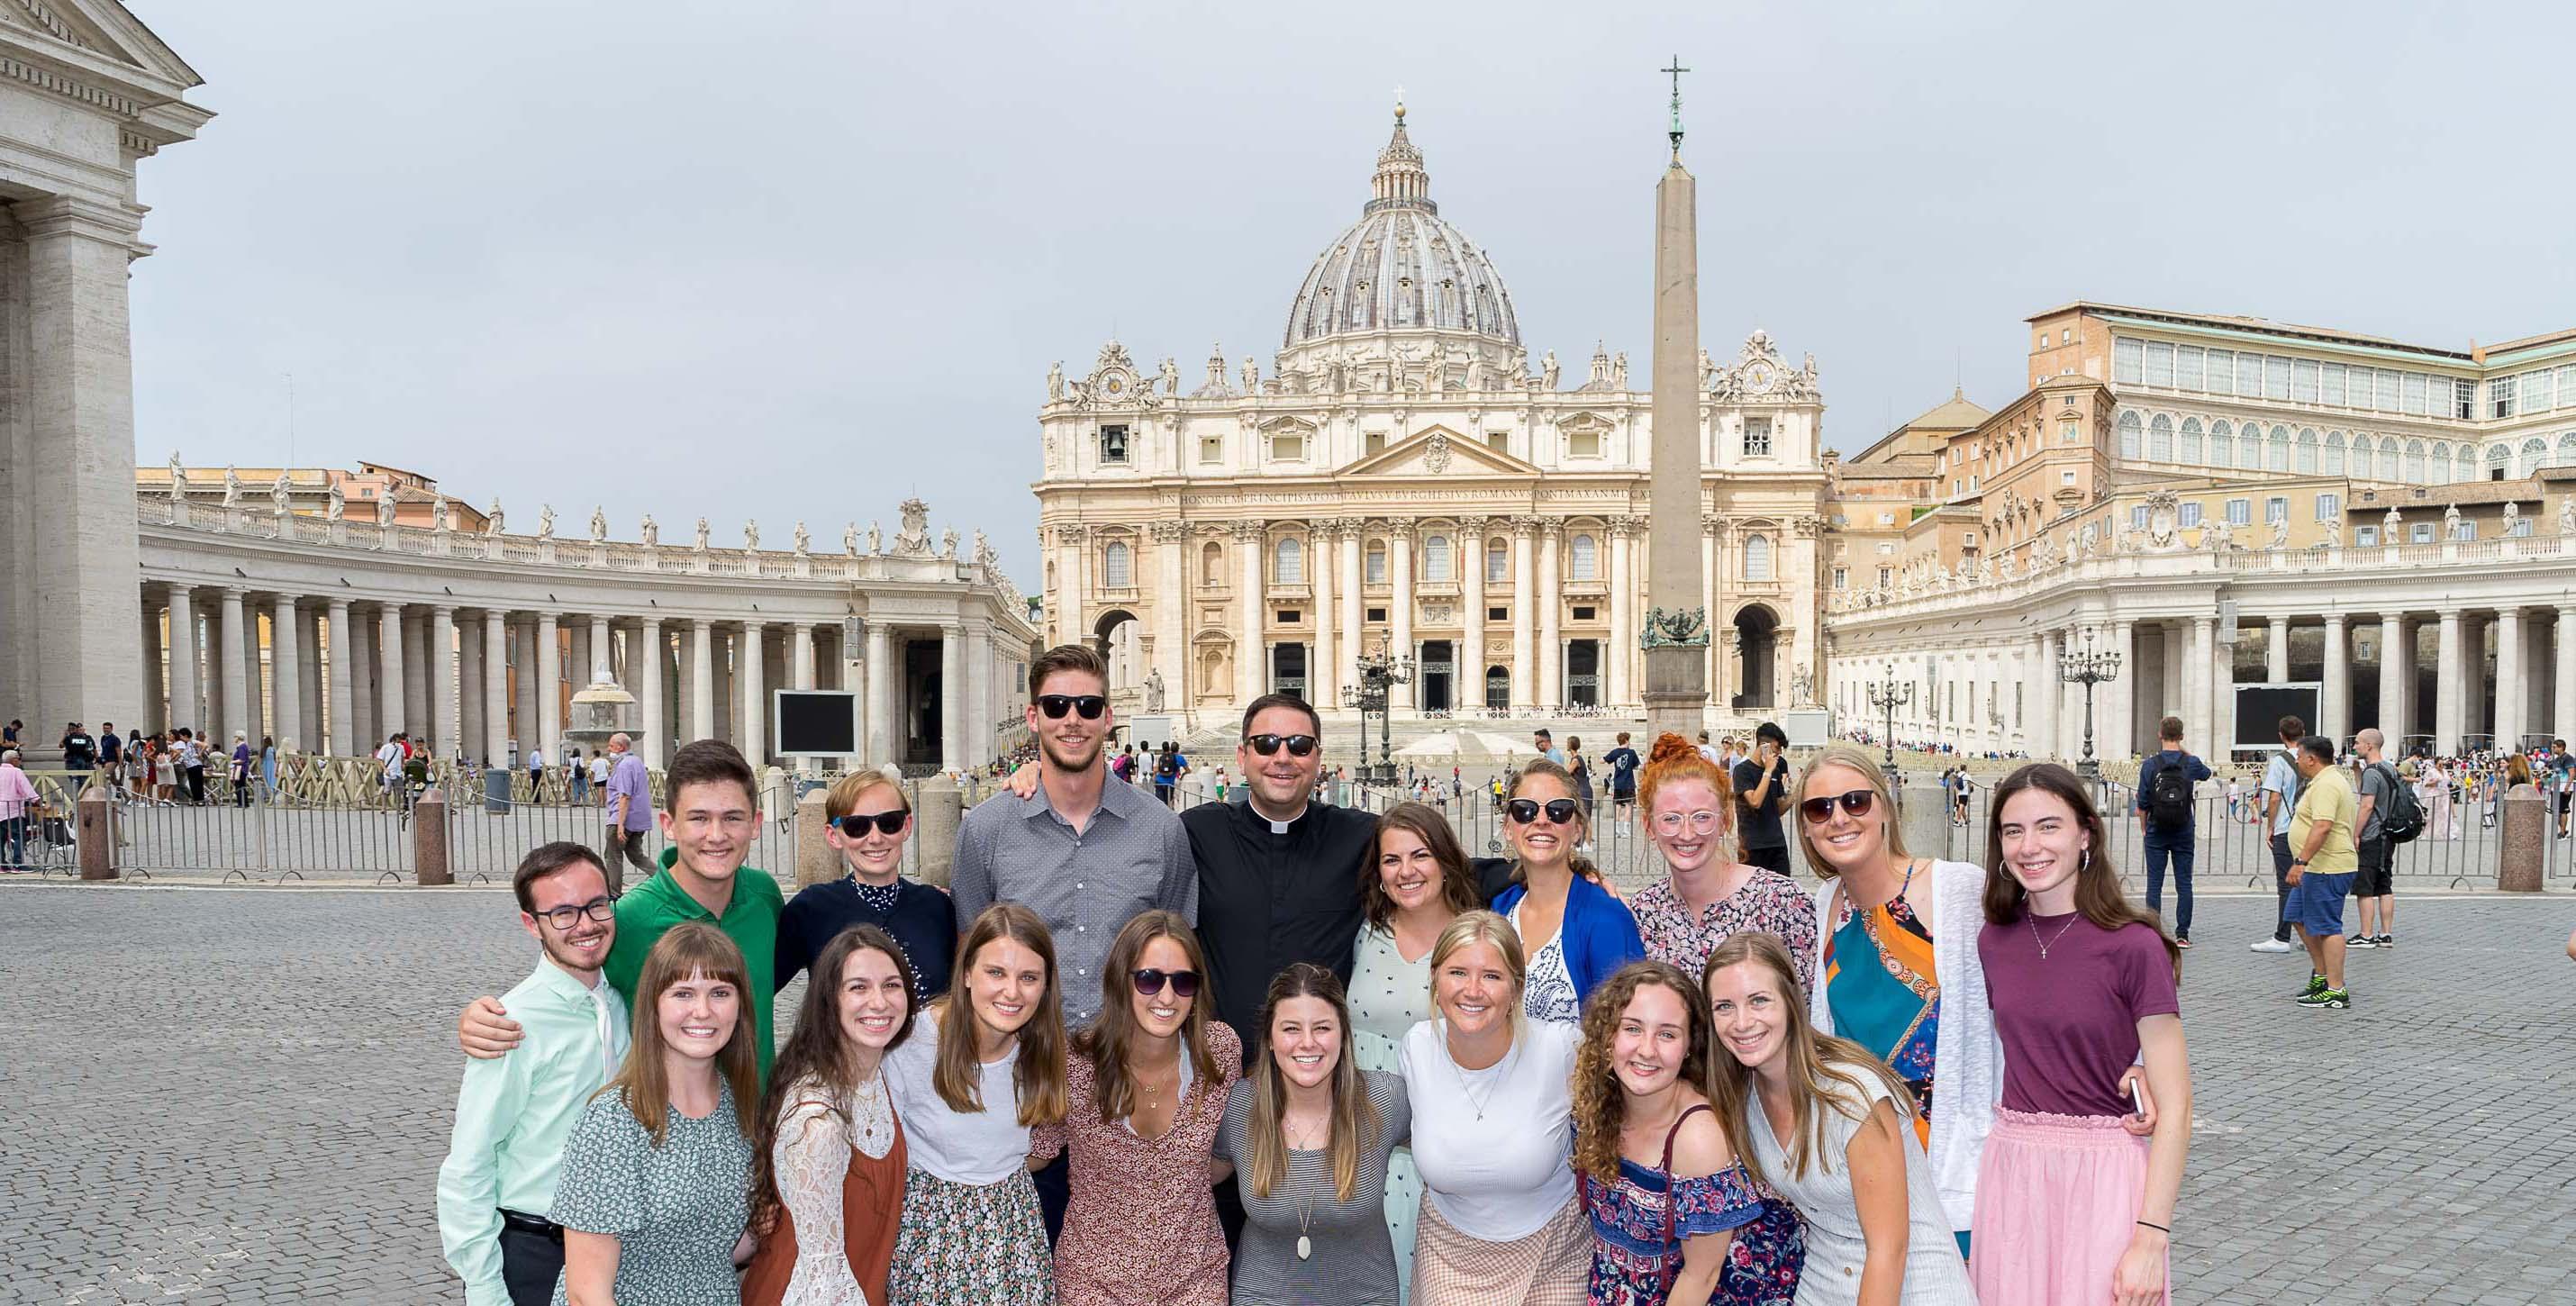 Smiling students in front of St. Peter's Basilica